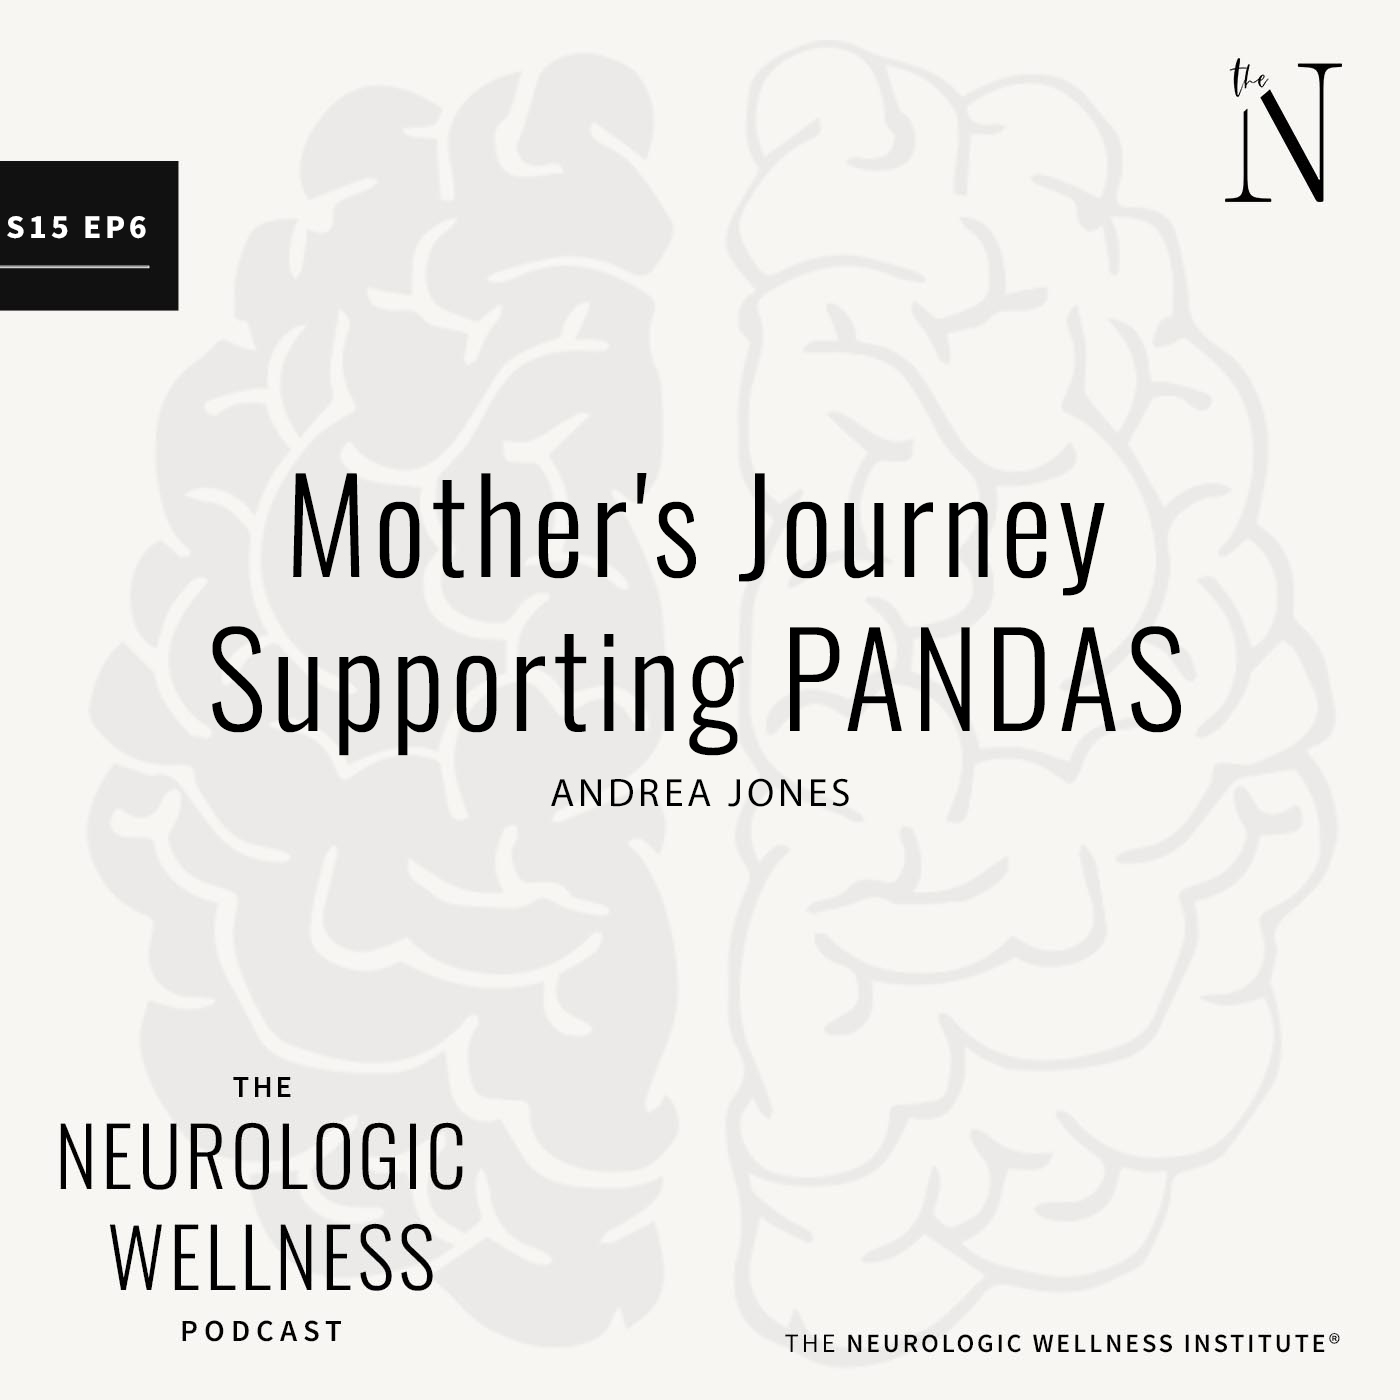 Mother's Journey Supporting PANDAS